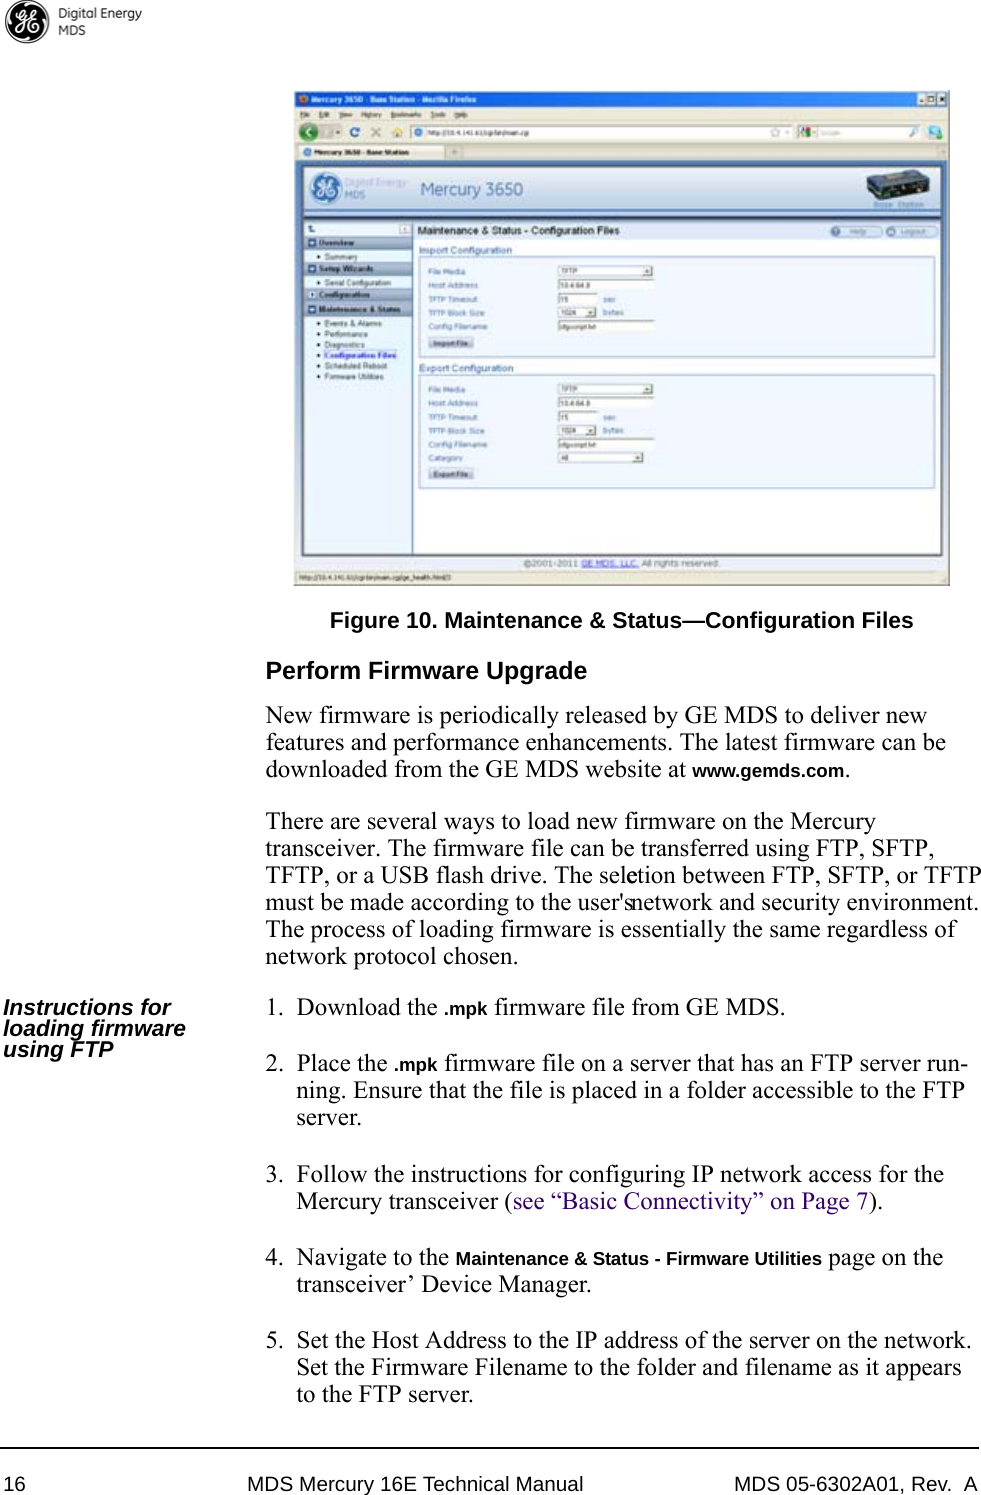 16 MDS Mercury 16E Technical Manual MDS 05-6302A01, Rev.  AInvisible place holderFigure 10. Maintenance &amp; Status—Configuration FilesPerform Firmware UpgradeNew firmware is periodically released by GE MDS to deliver new features and performance enhancements. The latest firmware can be downloaded from the GE MDS website at www.gemds.com. There are several ways to load new firmware on the Mercury transceiver. The firmware file can be transferred using FTP, SFTP, TFTP, or a USB flash drive. The selection between FTP, SFTP, or TFTP must be made according to the user&apos;s network and security environment. The process of loading firmware is essentially the same regardless of network protocol chosen. Instructions for loading firmware using FTP1. Download the .mpk firmware file from GE MDS.2. Place the .mpk firmware file on a server that has an FTP server run-ning. Ensure that the file is placed in a folder accessible to the FTP server.3. Follow the instructions for configuring IP network access for the Mercury transceiver (see “Basic Connectivity” on Page 7).4. Navigate to the Maintenance &amp; Status - Firmware Utilities page on the transceiver’ Device Manager.5. Set the Host Address to the IP address of the server on the network. Set the Firmware Filename to the folder and filename as it appears to the FTP server.